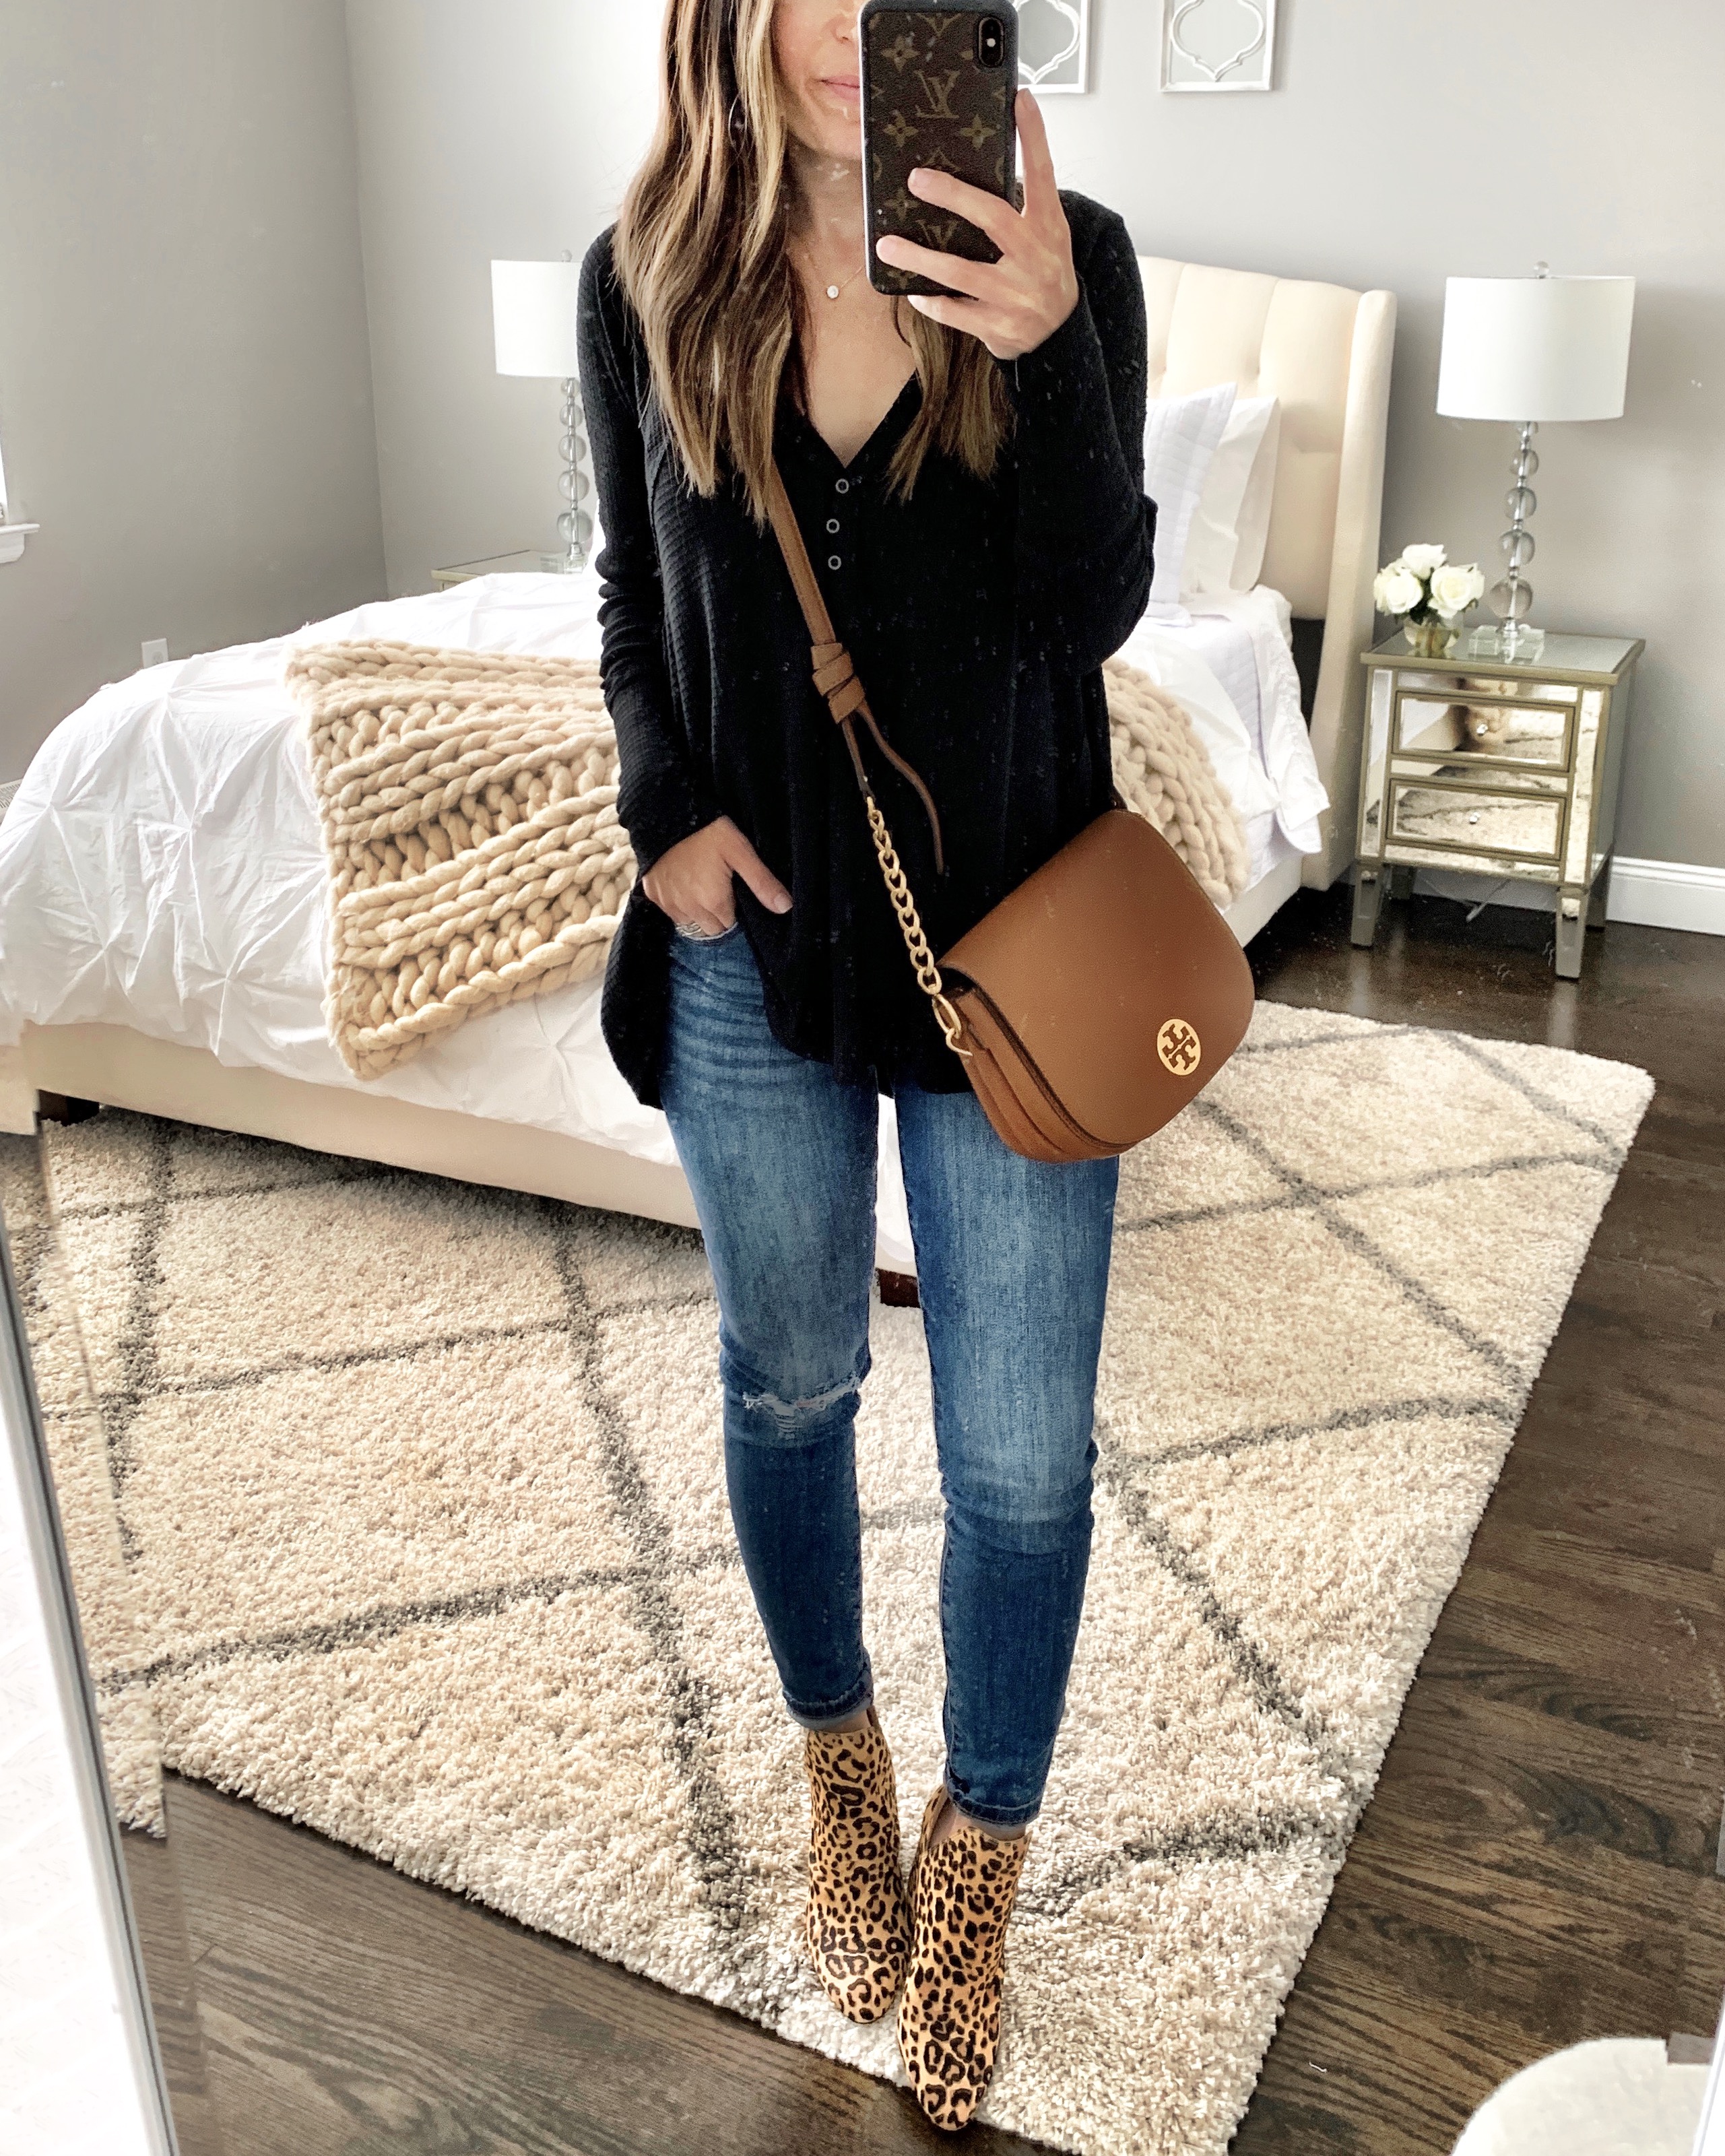 Nordstrom Anniversary Sale: My Purchases | MrsCasual